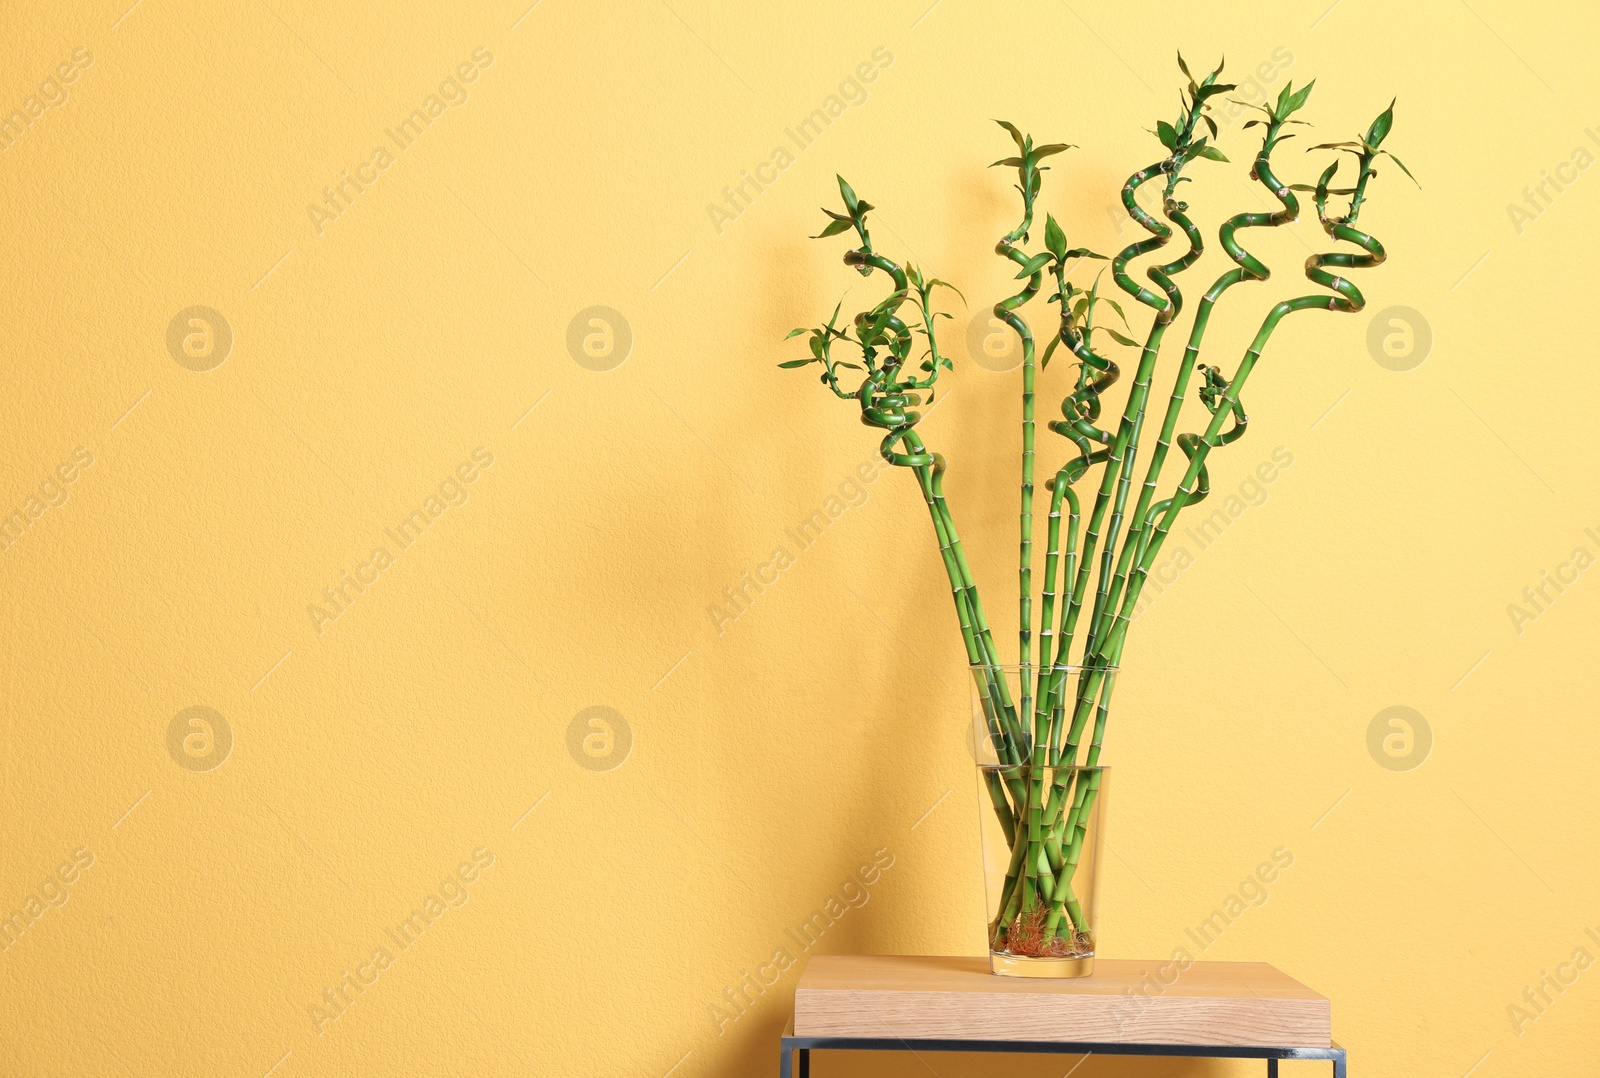 Photo of Vase with green bamboo on table against color background. Space for text